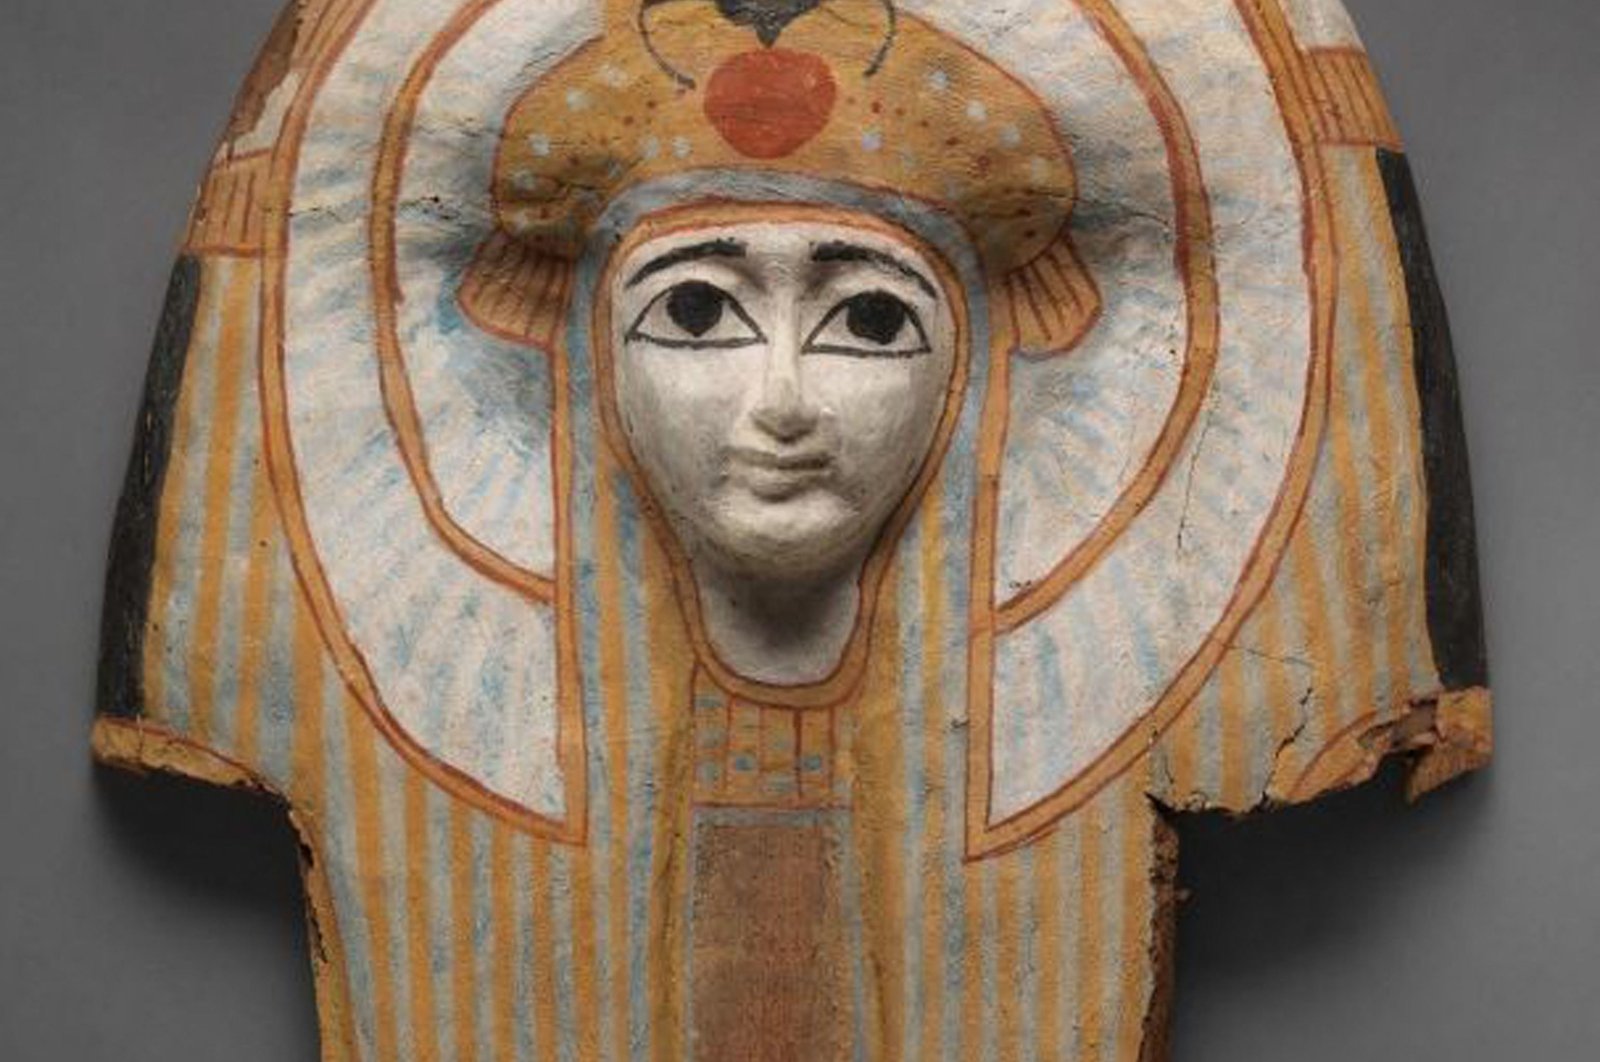 A face from a painted wooden Egyptian coffin dated around 945-712 BC is seen in this image released in a search warrant issued by the Supreme Court of the State of New York on May 19, 2022. (AFP Photo)